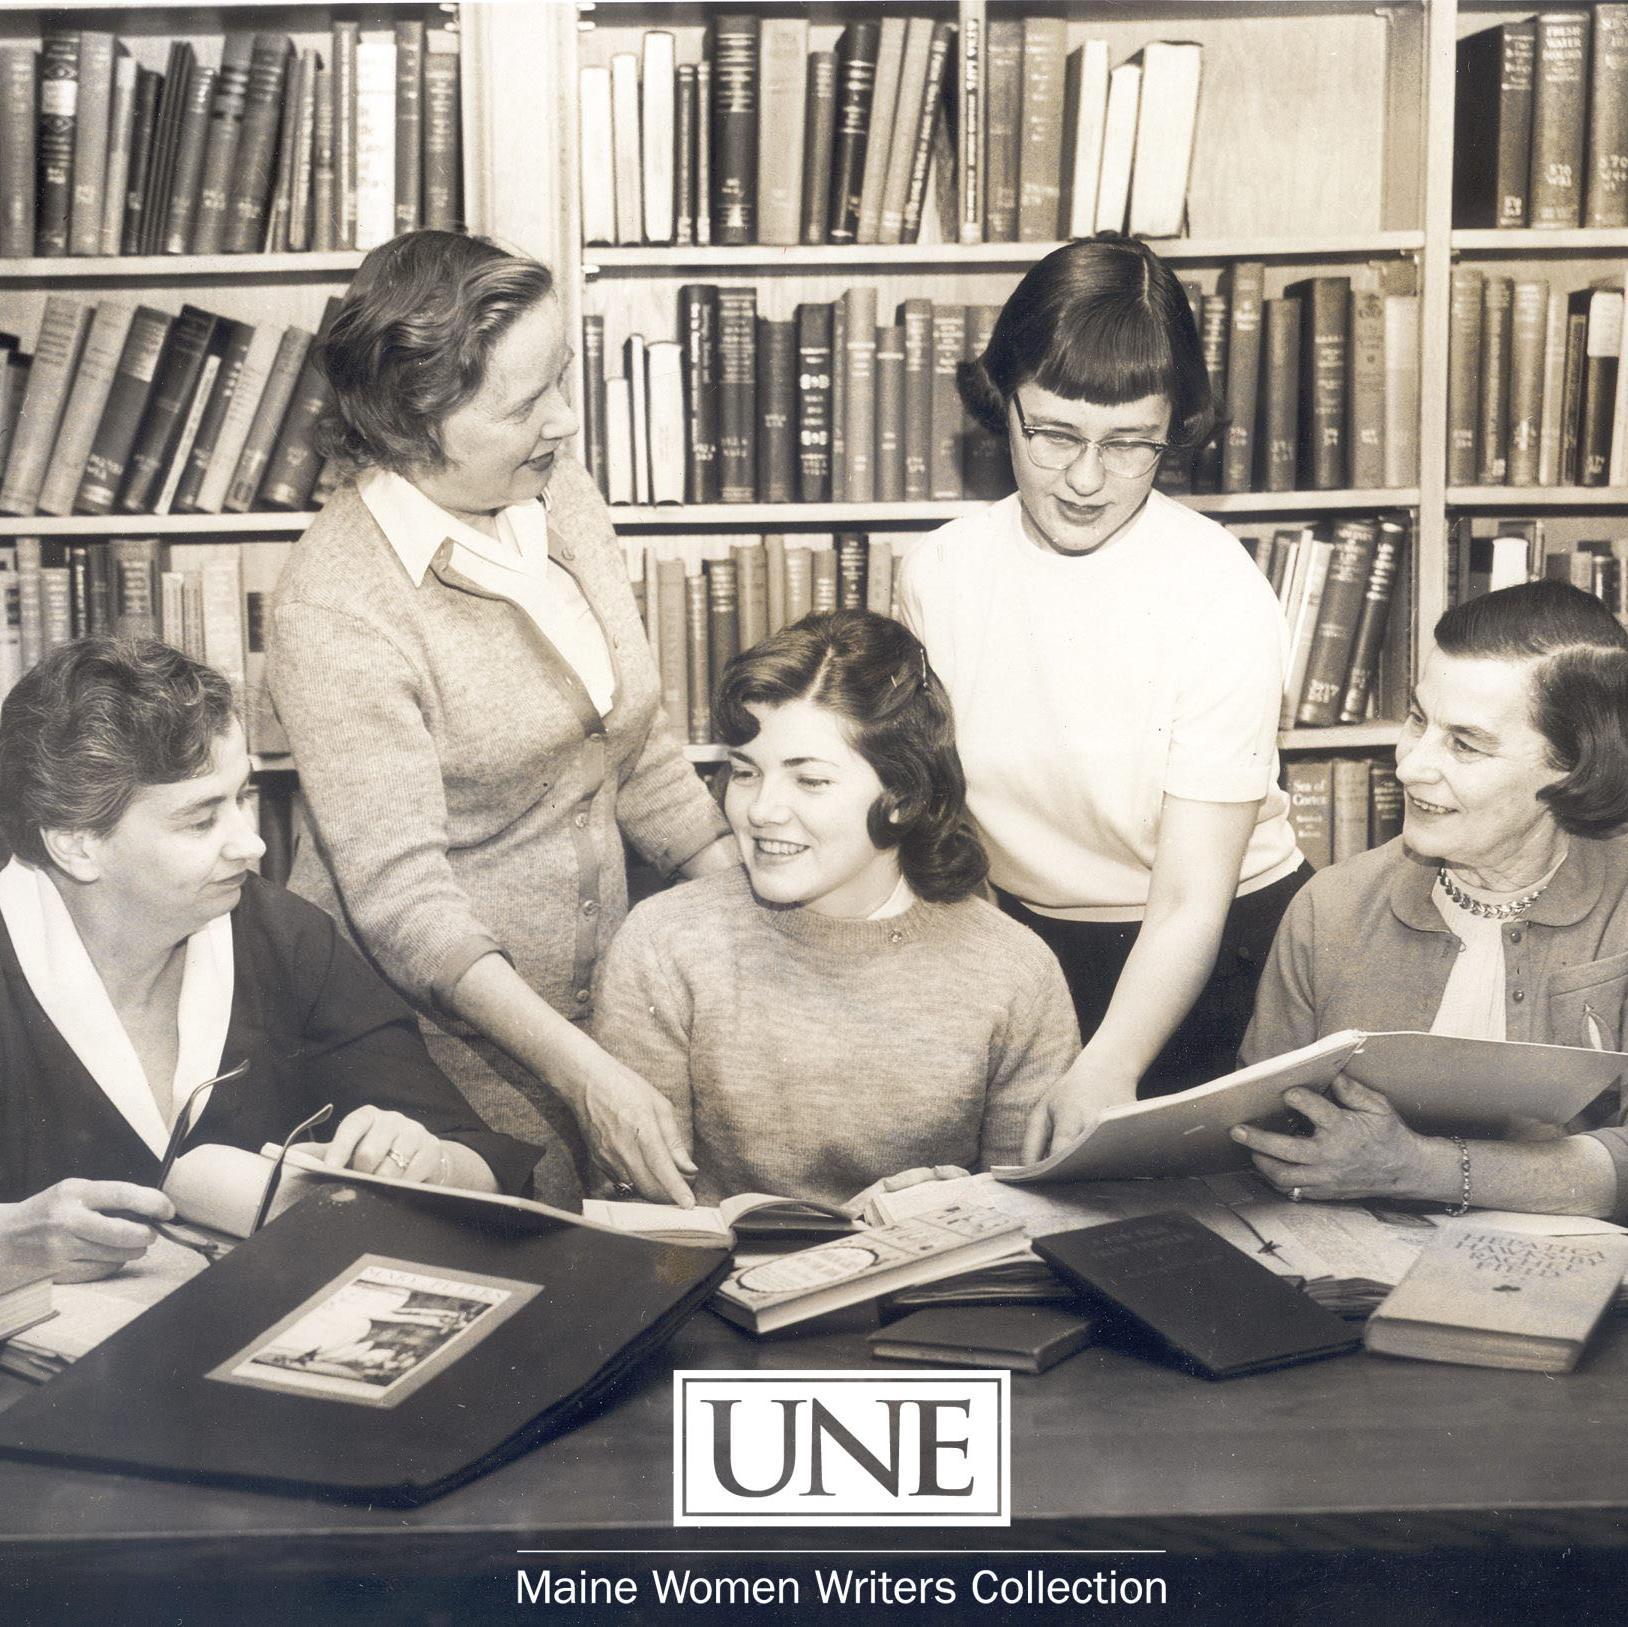 The Maine Women Writers Collection at the University of New England collects the work of Maine women writers, artists, activists, diarists, and more.